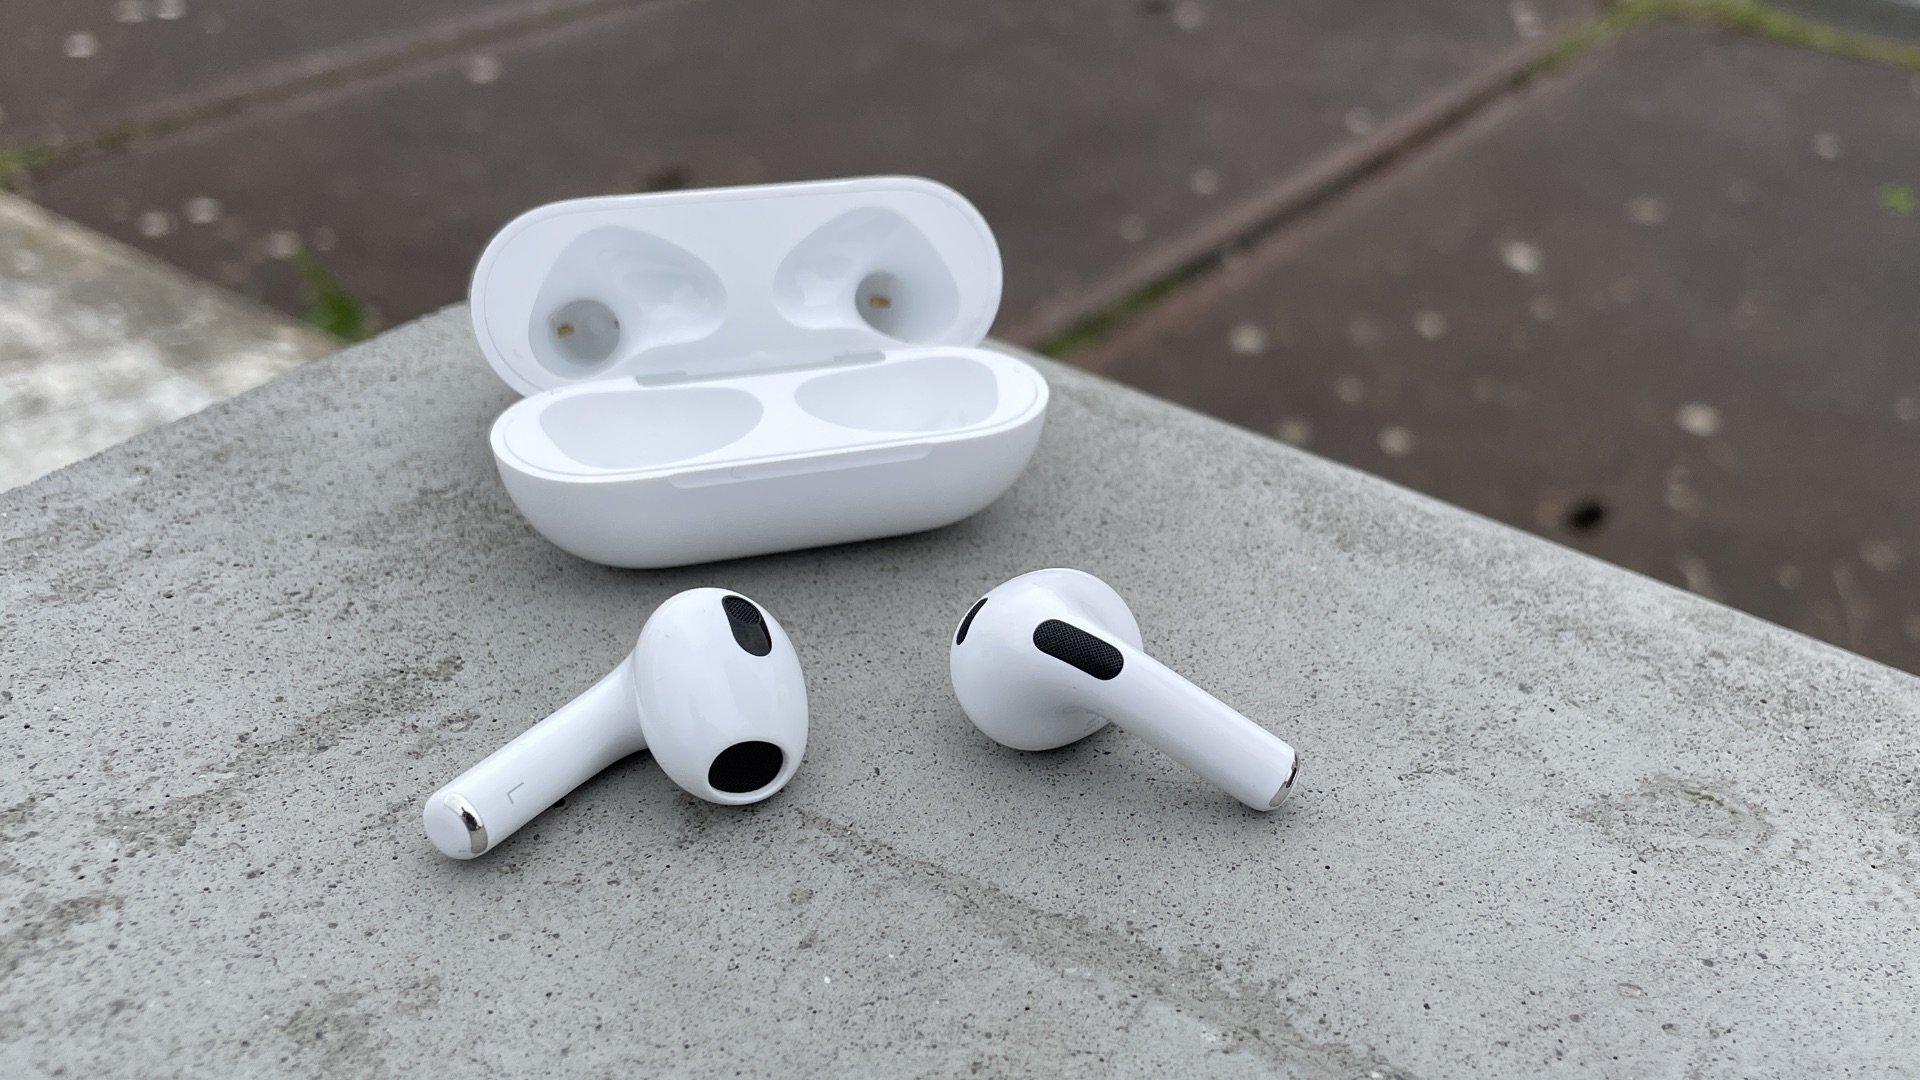 Review: AirPods versus cheaper alternatives